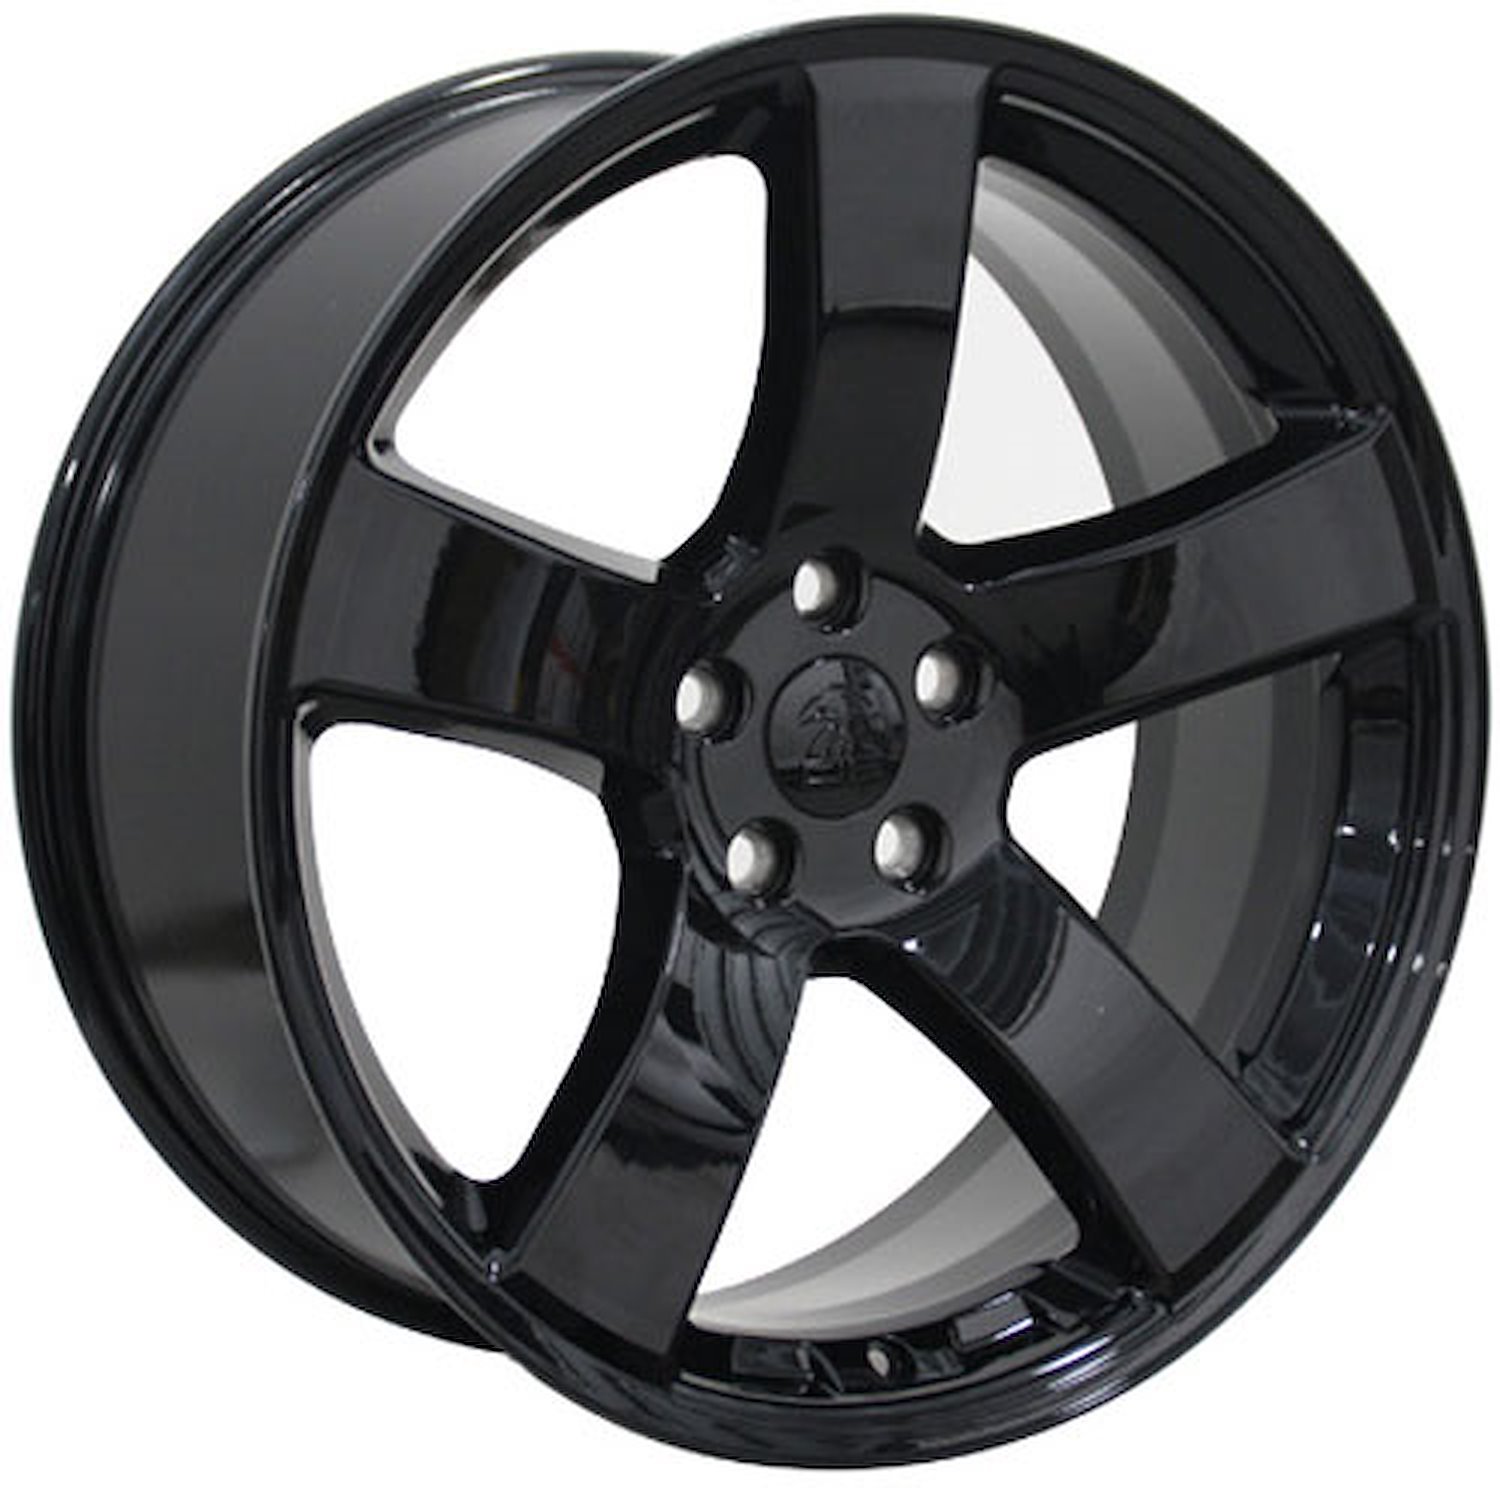 Dodge Charger Style Wheel Size: 20" x 8"